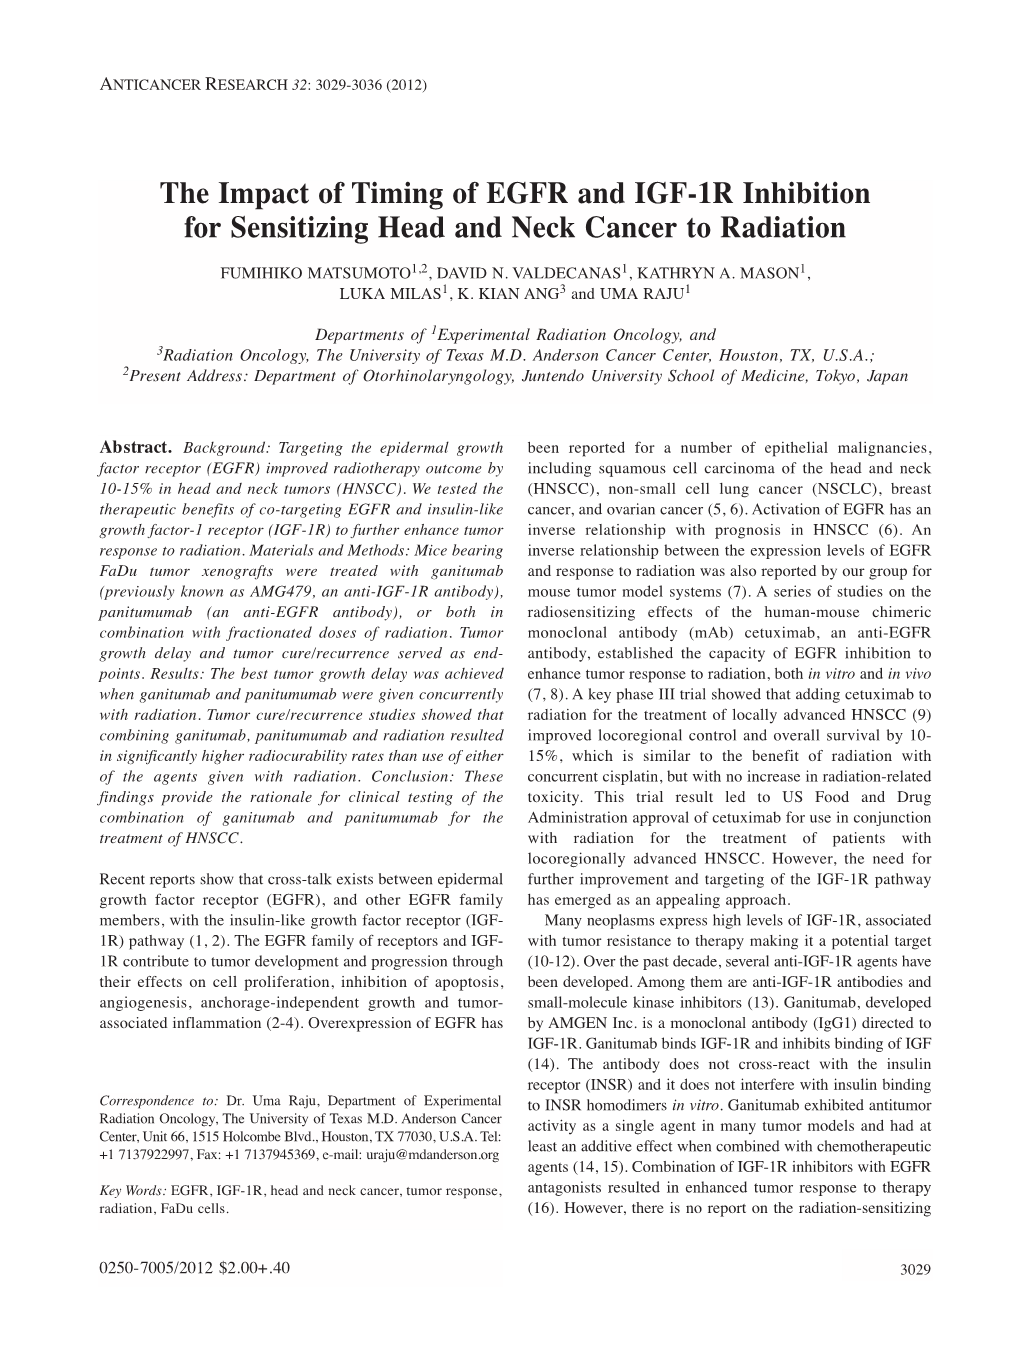 The Impact of Timing of EGFR and IGF-1R Inhibition for Sensitizing Head and Neck Cancer to Radiation